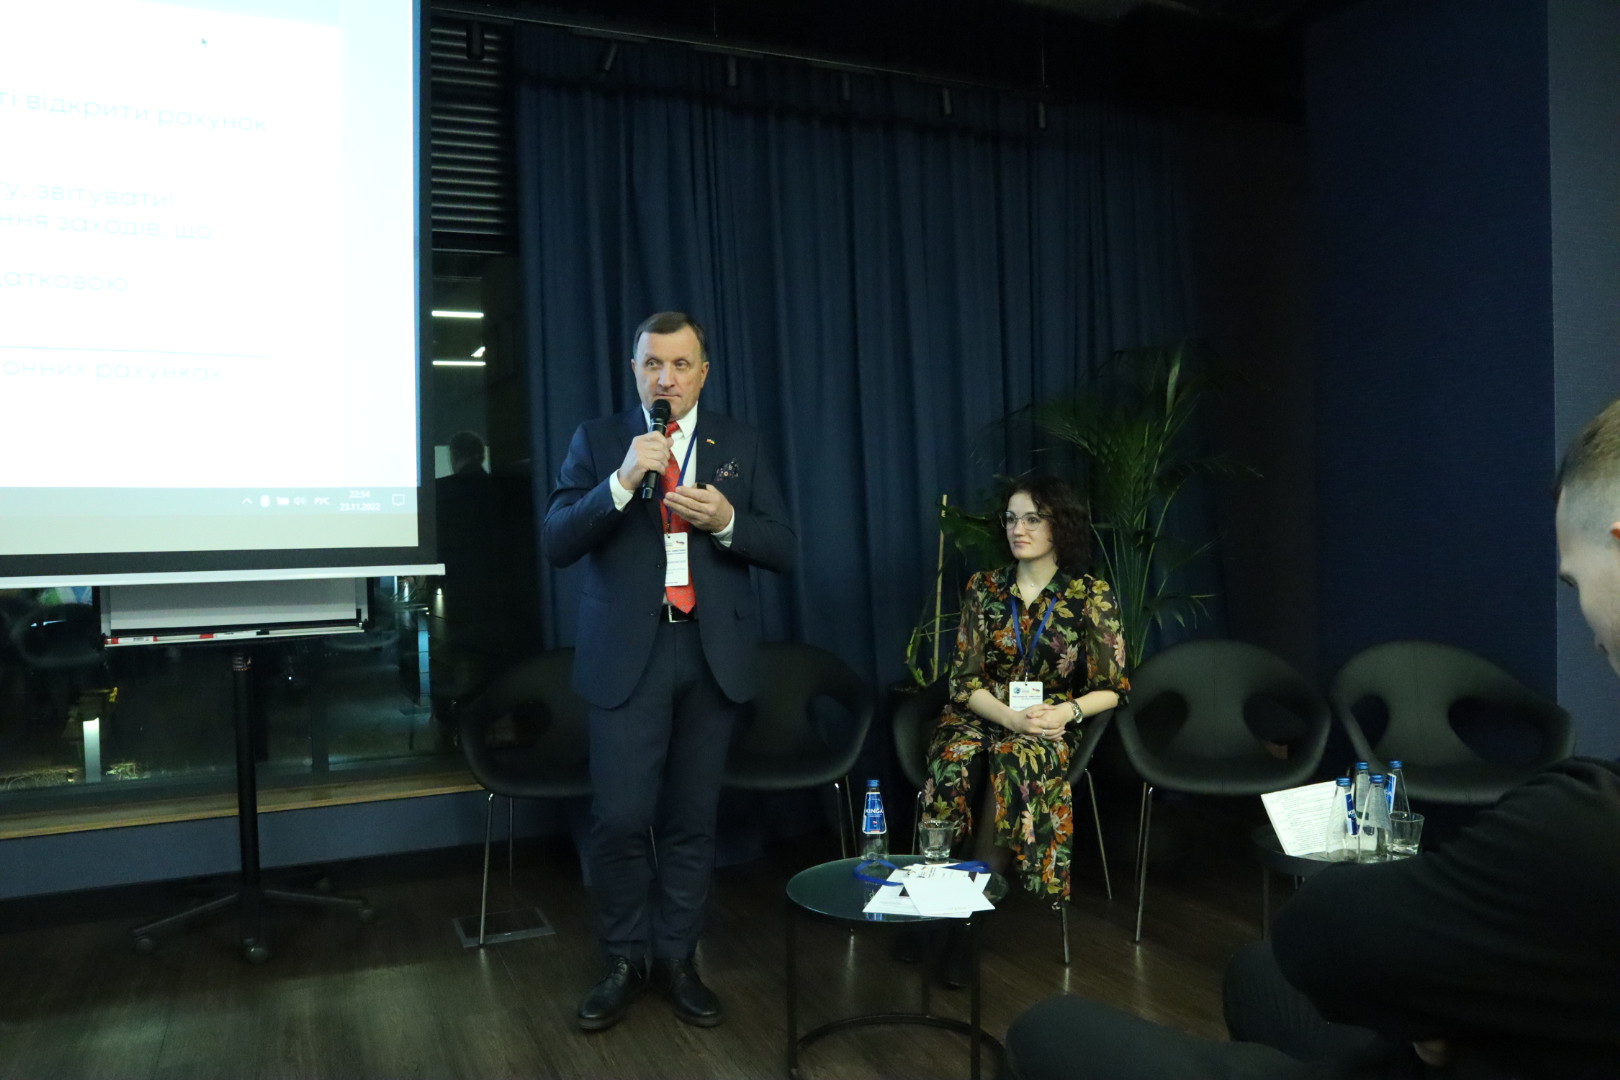 The state of the real estate market in Poland, investments, business contacts and new markets: Yaroslav Romanchuk and Inga Livandovska were the speakers of the conference “Real Estate and Investments in Poland” by BBN